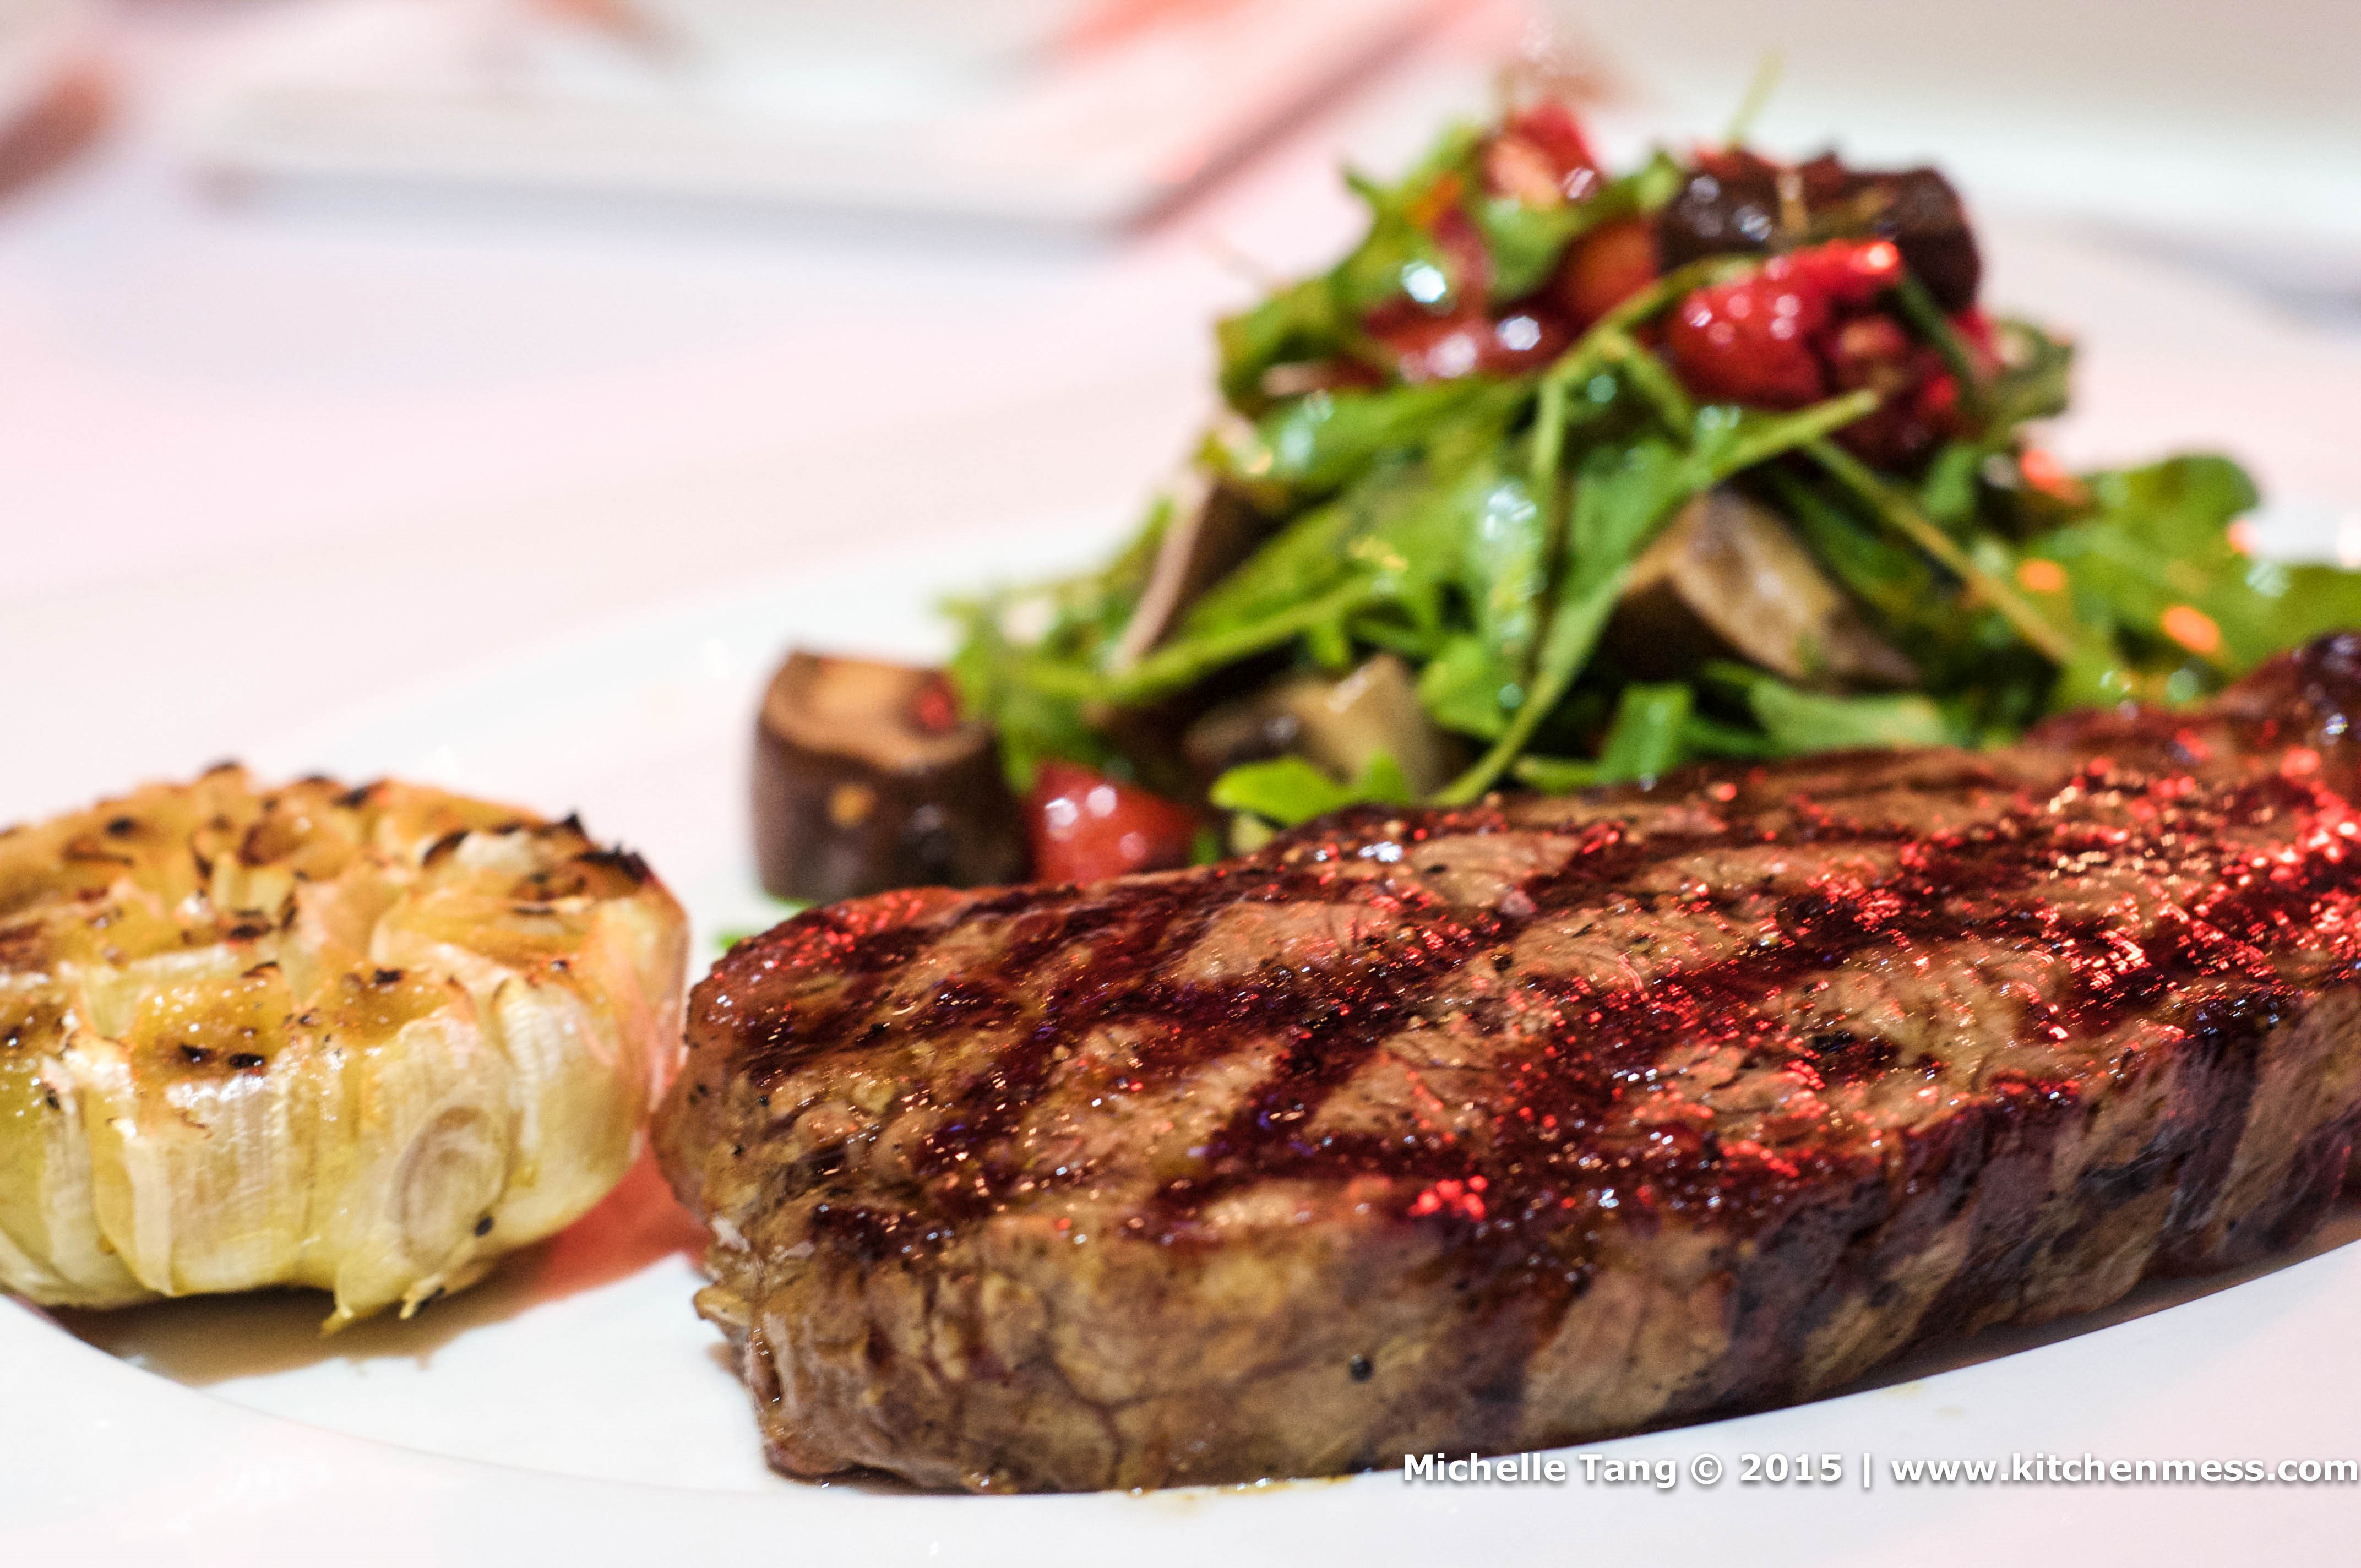 US Certified Prime Black Angus Sirloin, perfectly grilled to your liking.